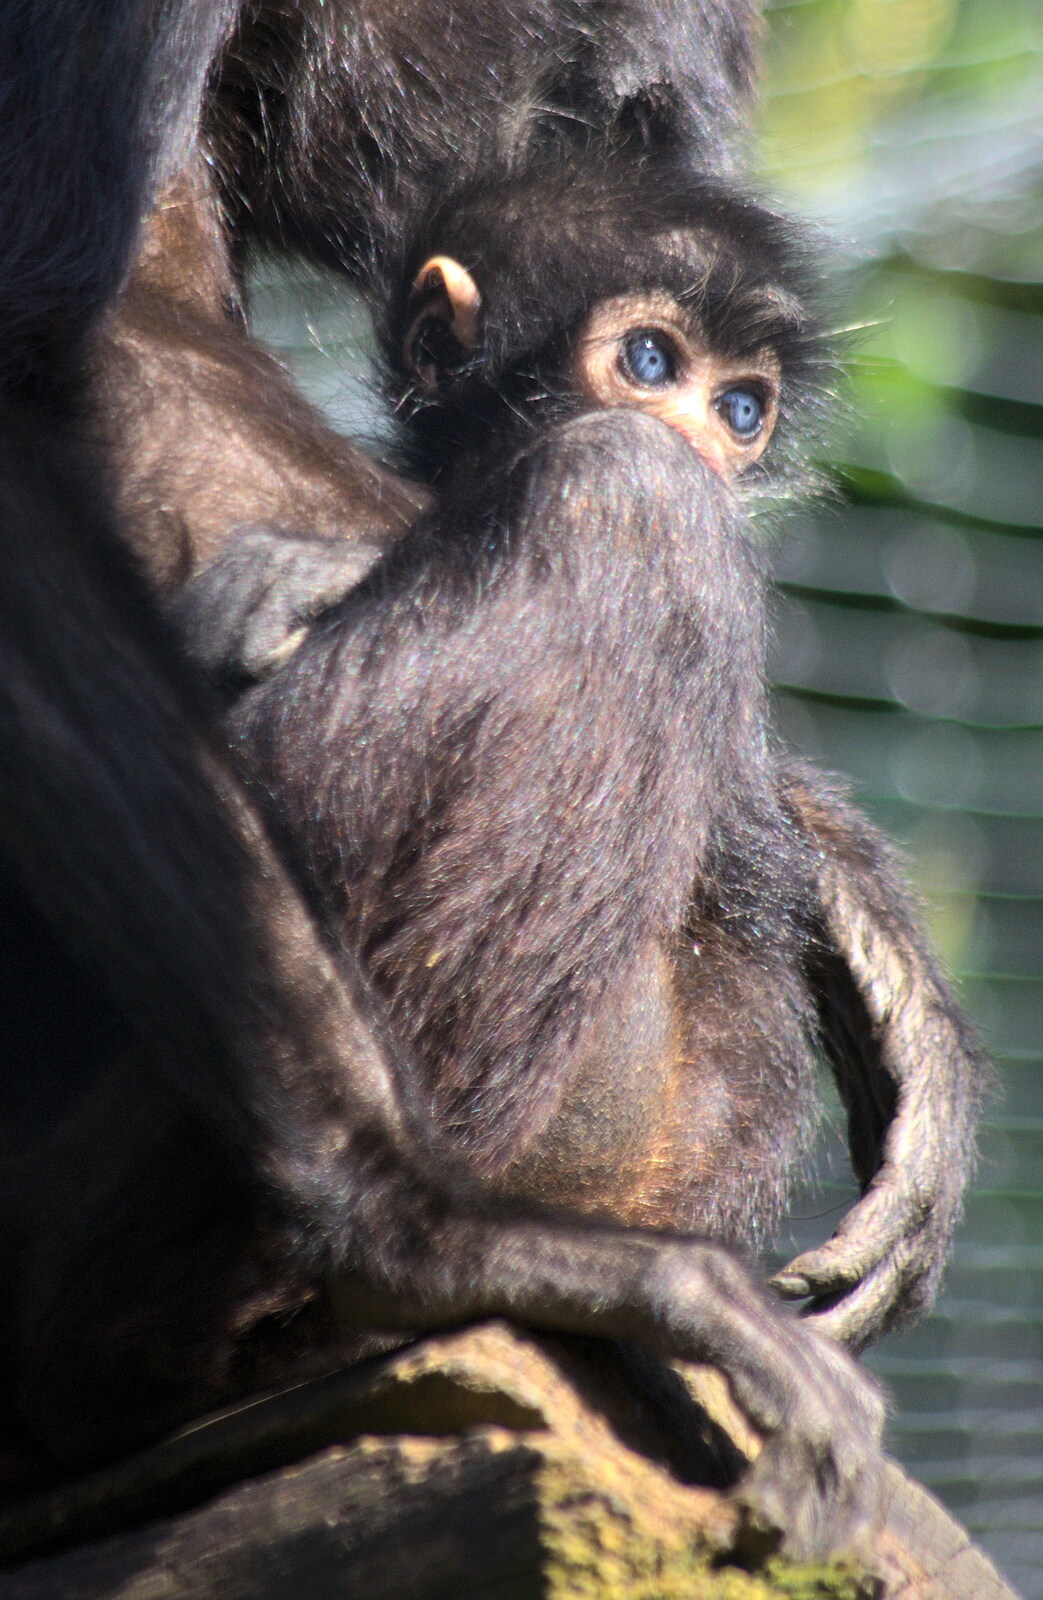 The blue-eyed monkey baby from Another Trip to Banham Zoo, Banham, Norfolk - 25th March 2016